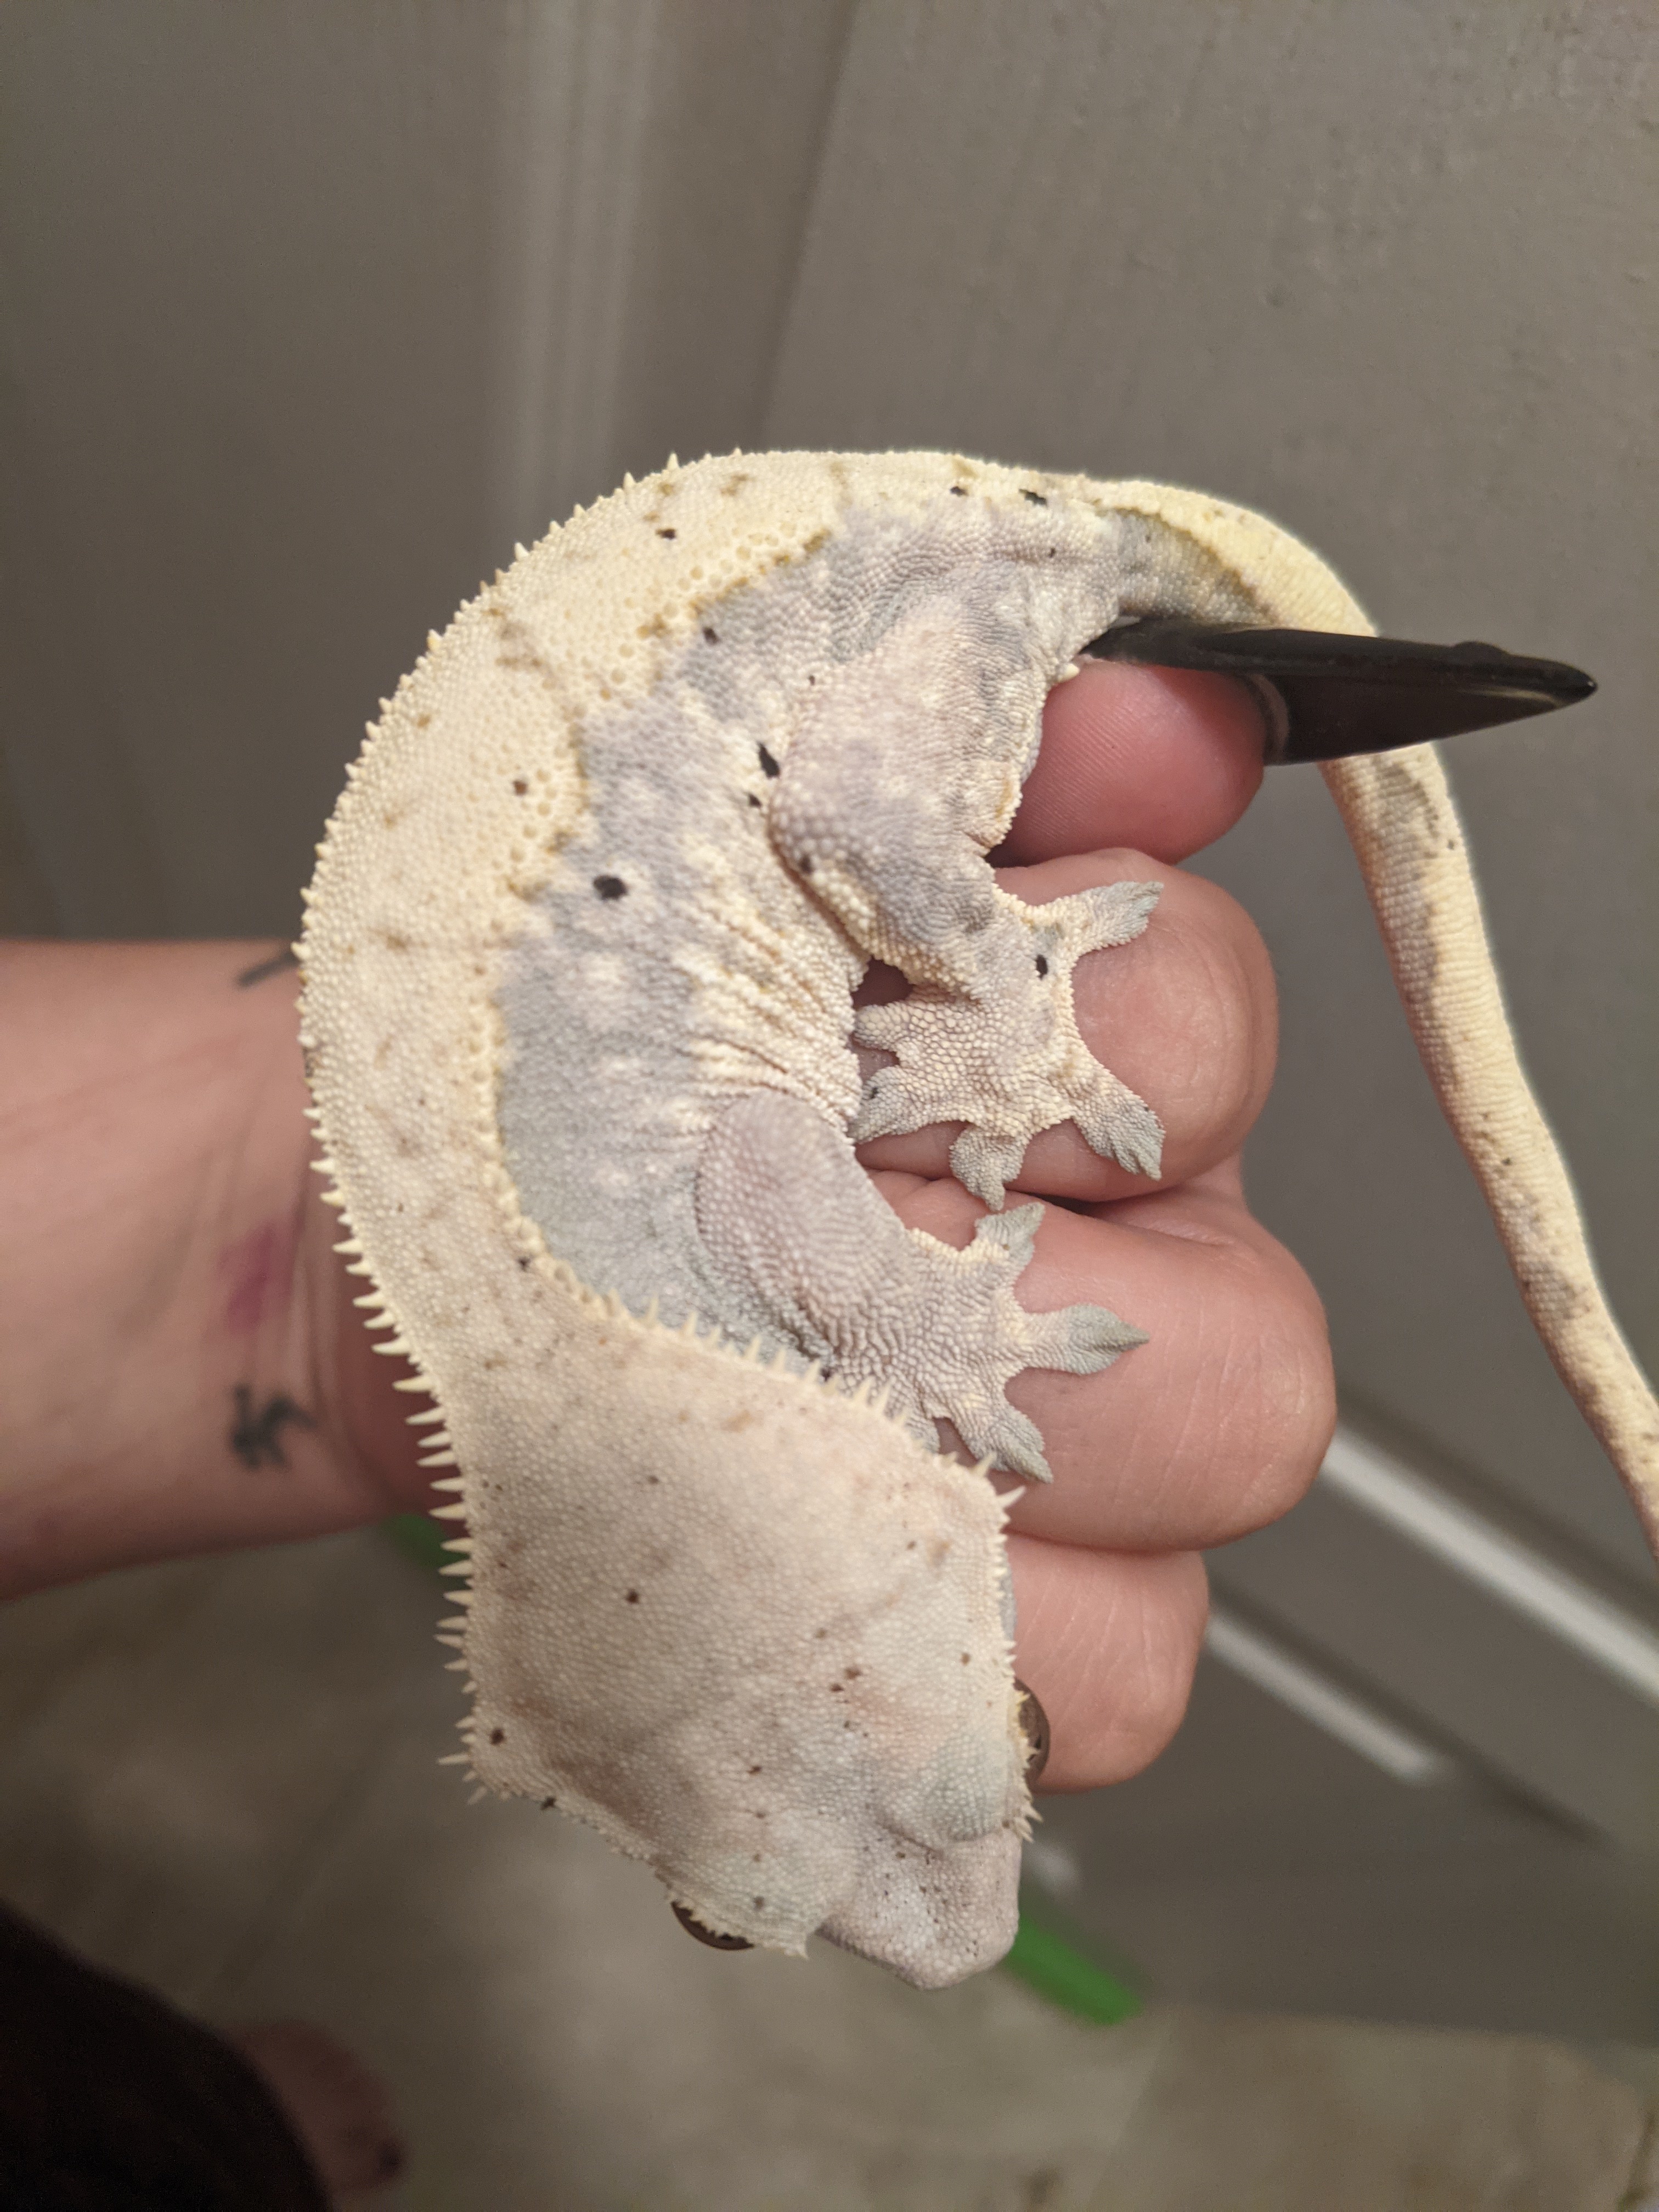 Proven Lavender Female Crested Gecko by 𝕲𝖔T𝖍𝖎𝖈𝖈_𝕲𝖊𝖈𝖐os